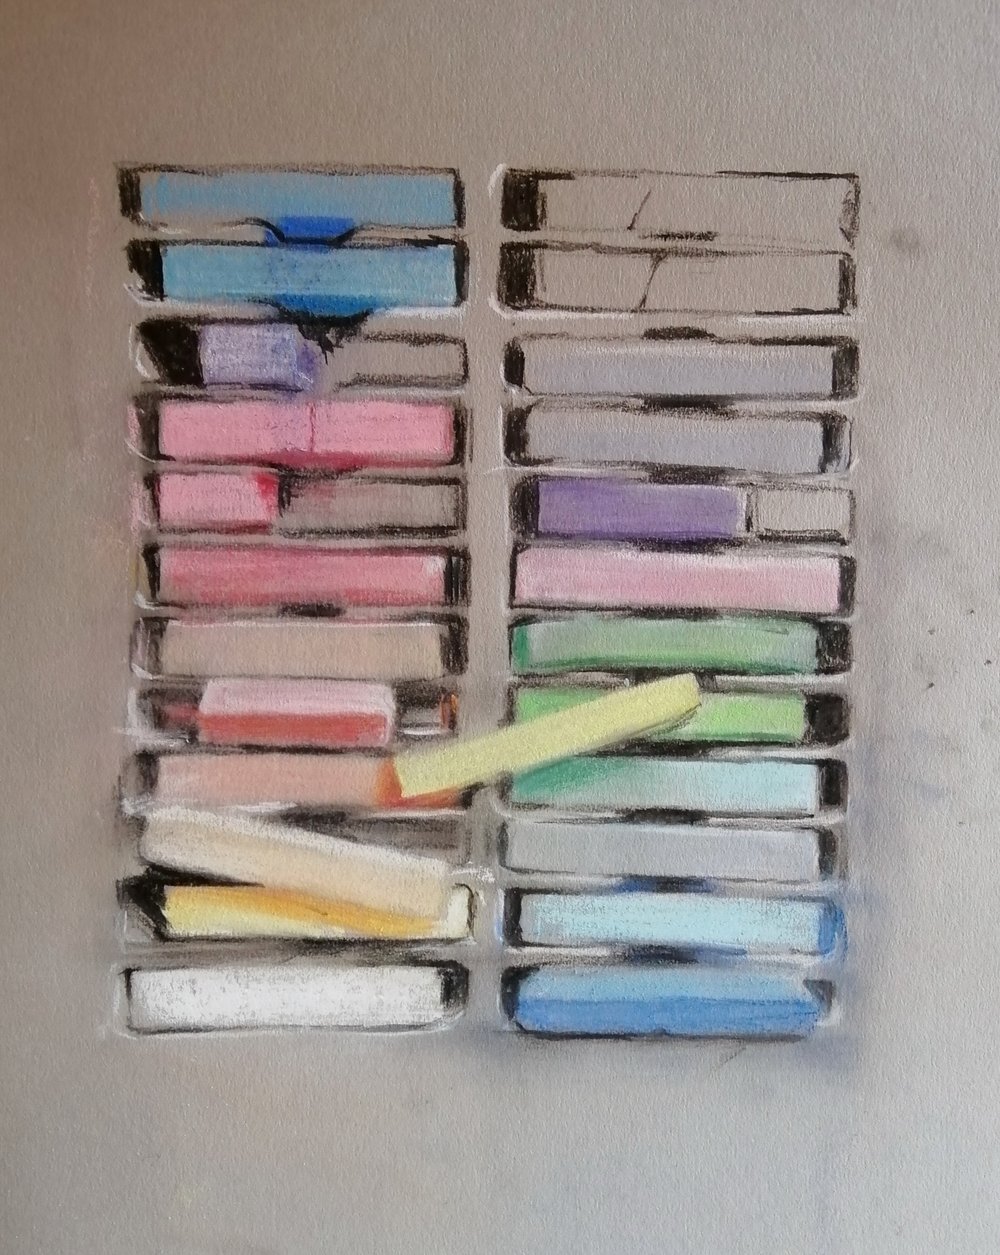  Pastels in pastels  Pastel and charcoal  26x31cm  £395  A pastel drawing of pastels 